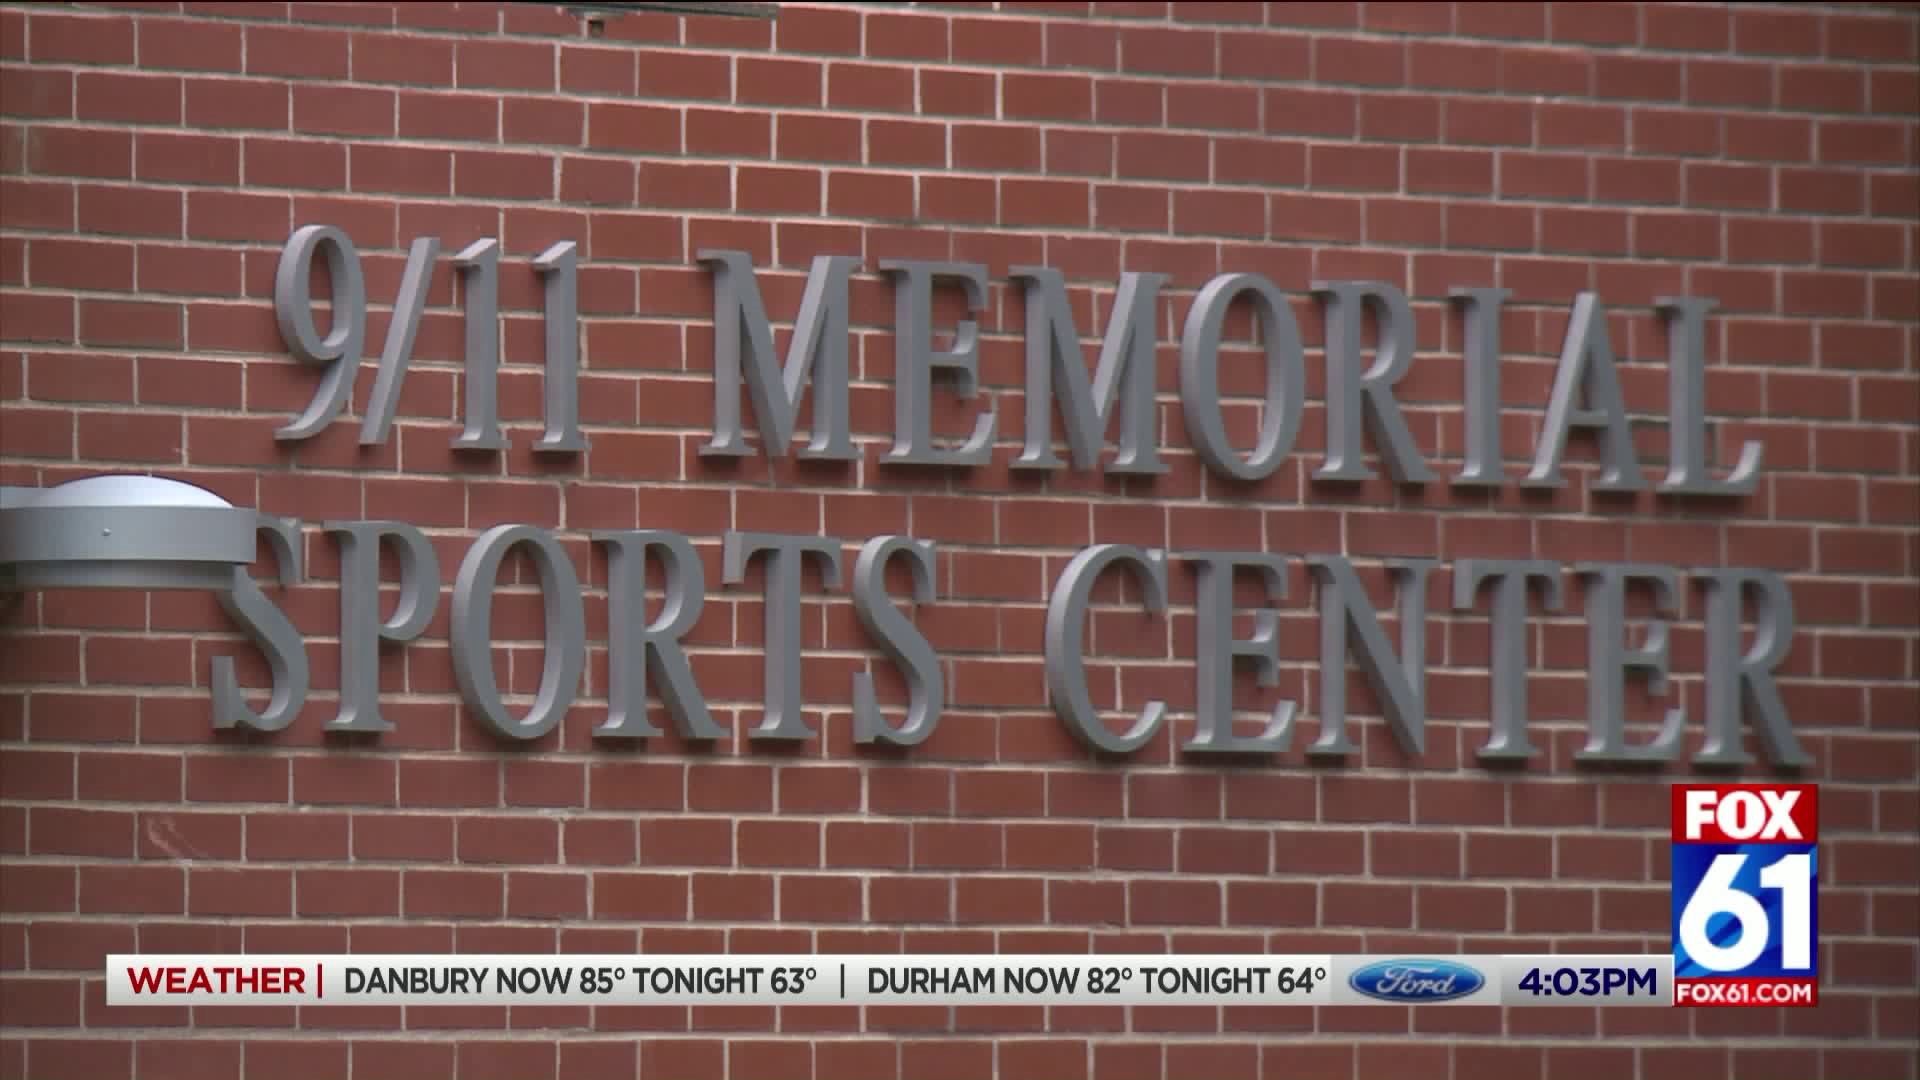 Memorial Sports Complex in Wethersfield built in tribute to 9/11 victims